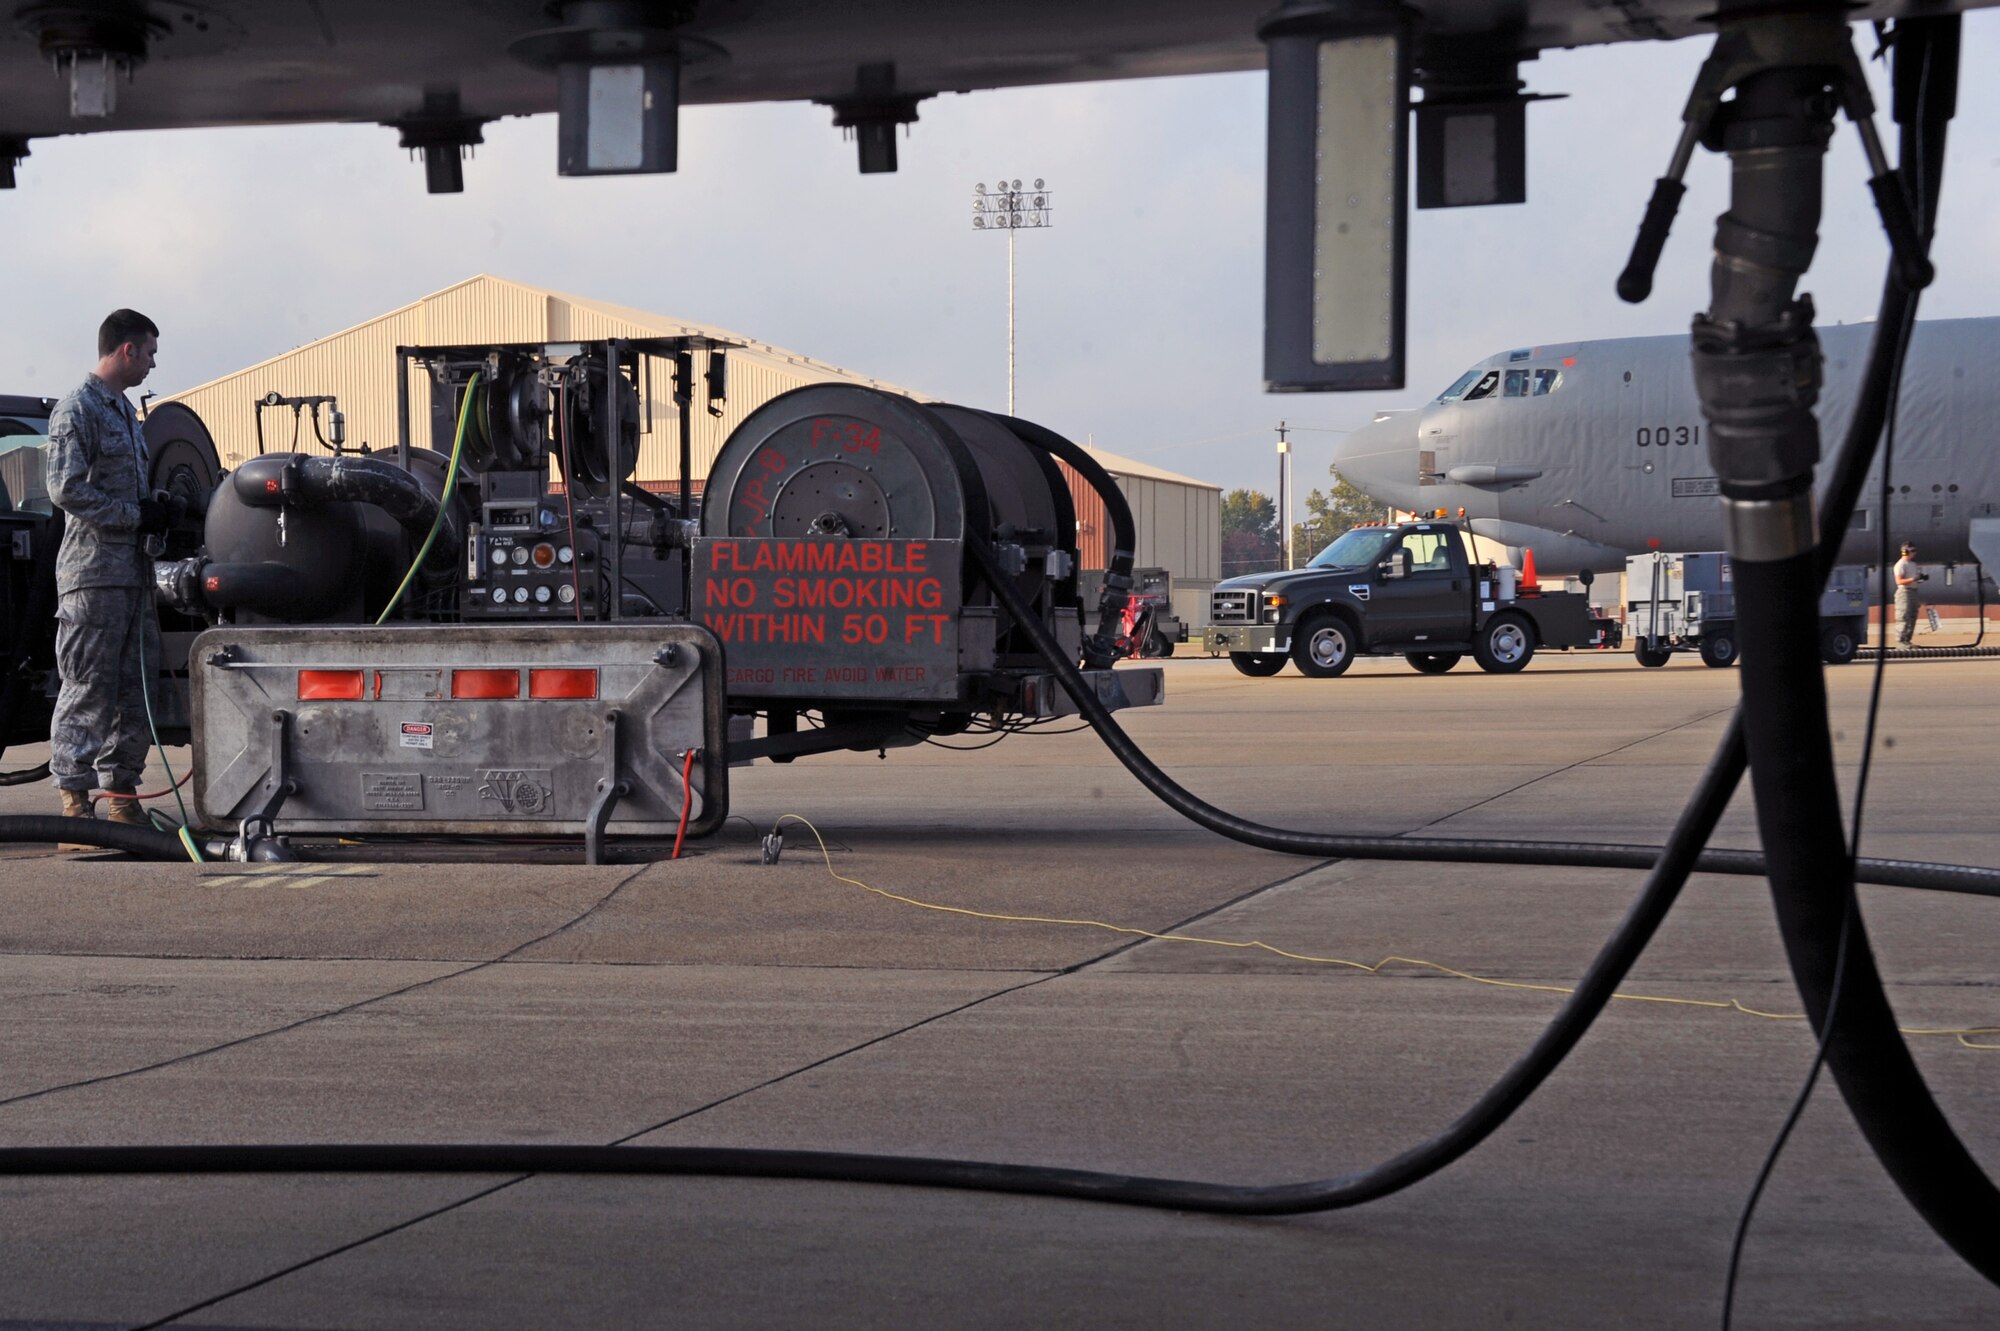 Airman 1st Class Johnny Bippert, 2nd Logistics Readiness Squadron, refuels a B-52H Stratofortress at Barksdale Air Force Base, La., Nov. 22. The 2 LRS team consists of more than 491 personnel across seven flights consisting of material management, fuels management, readiness, management and systems, traffic management, vehicle management and vehicle operations. (U.S. Air Force photo/Senior Airman Brittany Y. Bateman)(RELEASED)